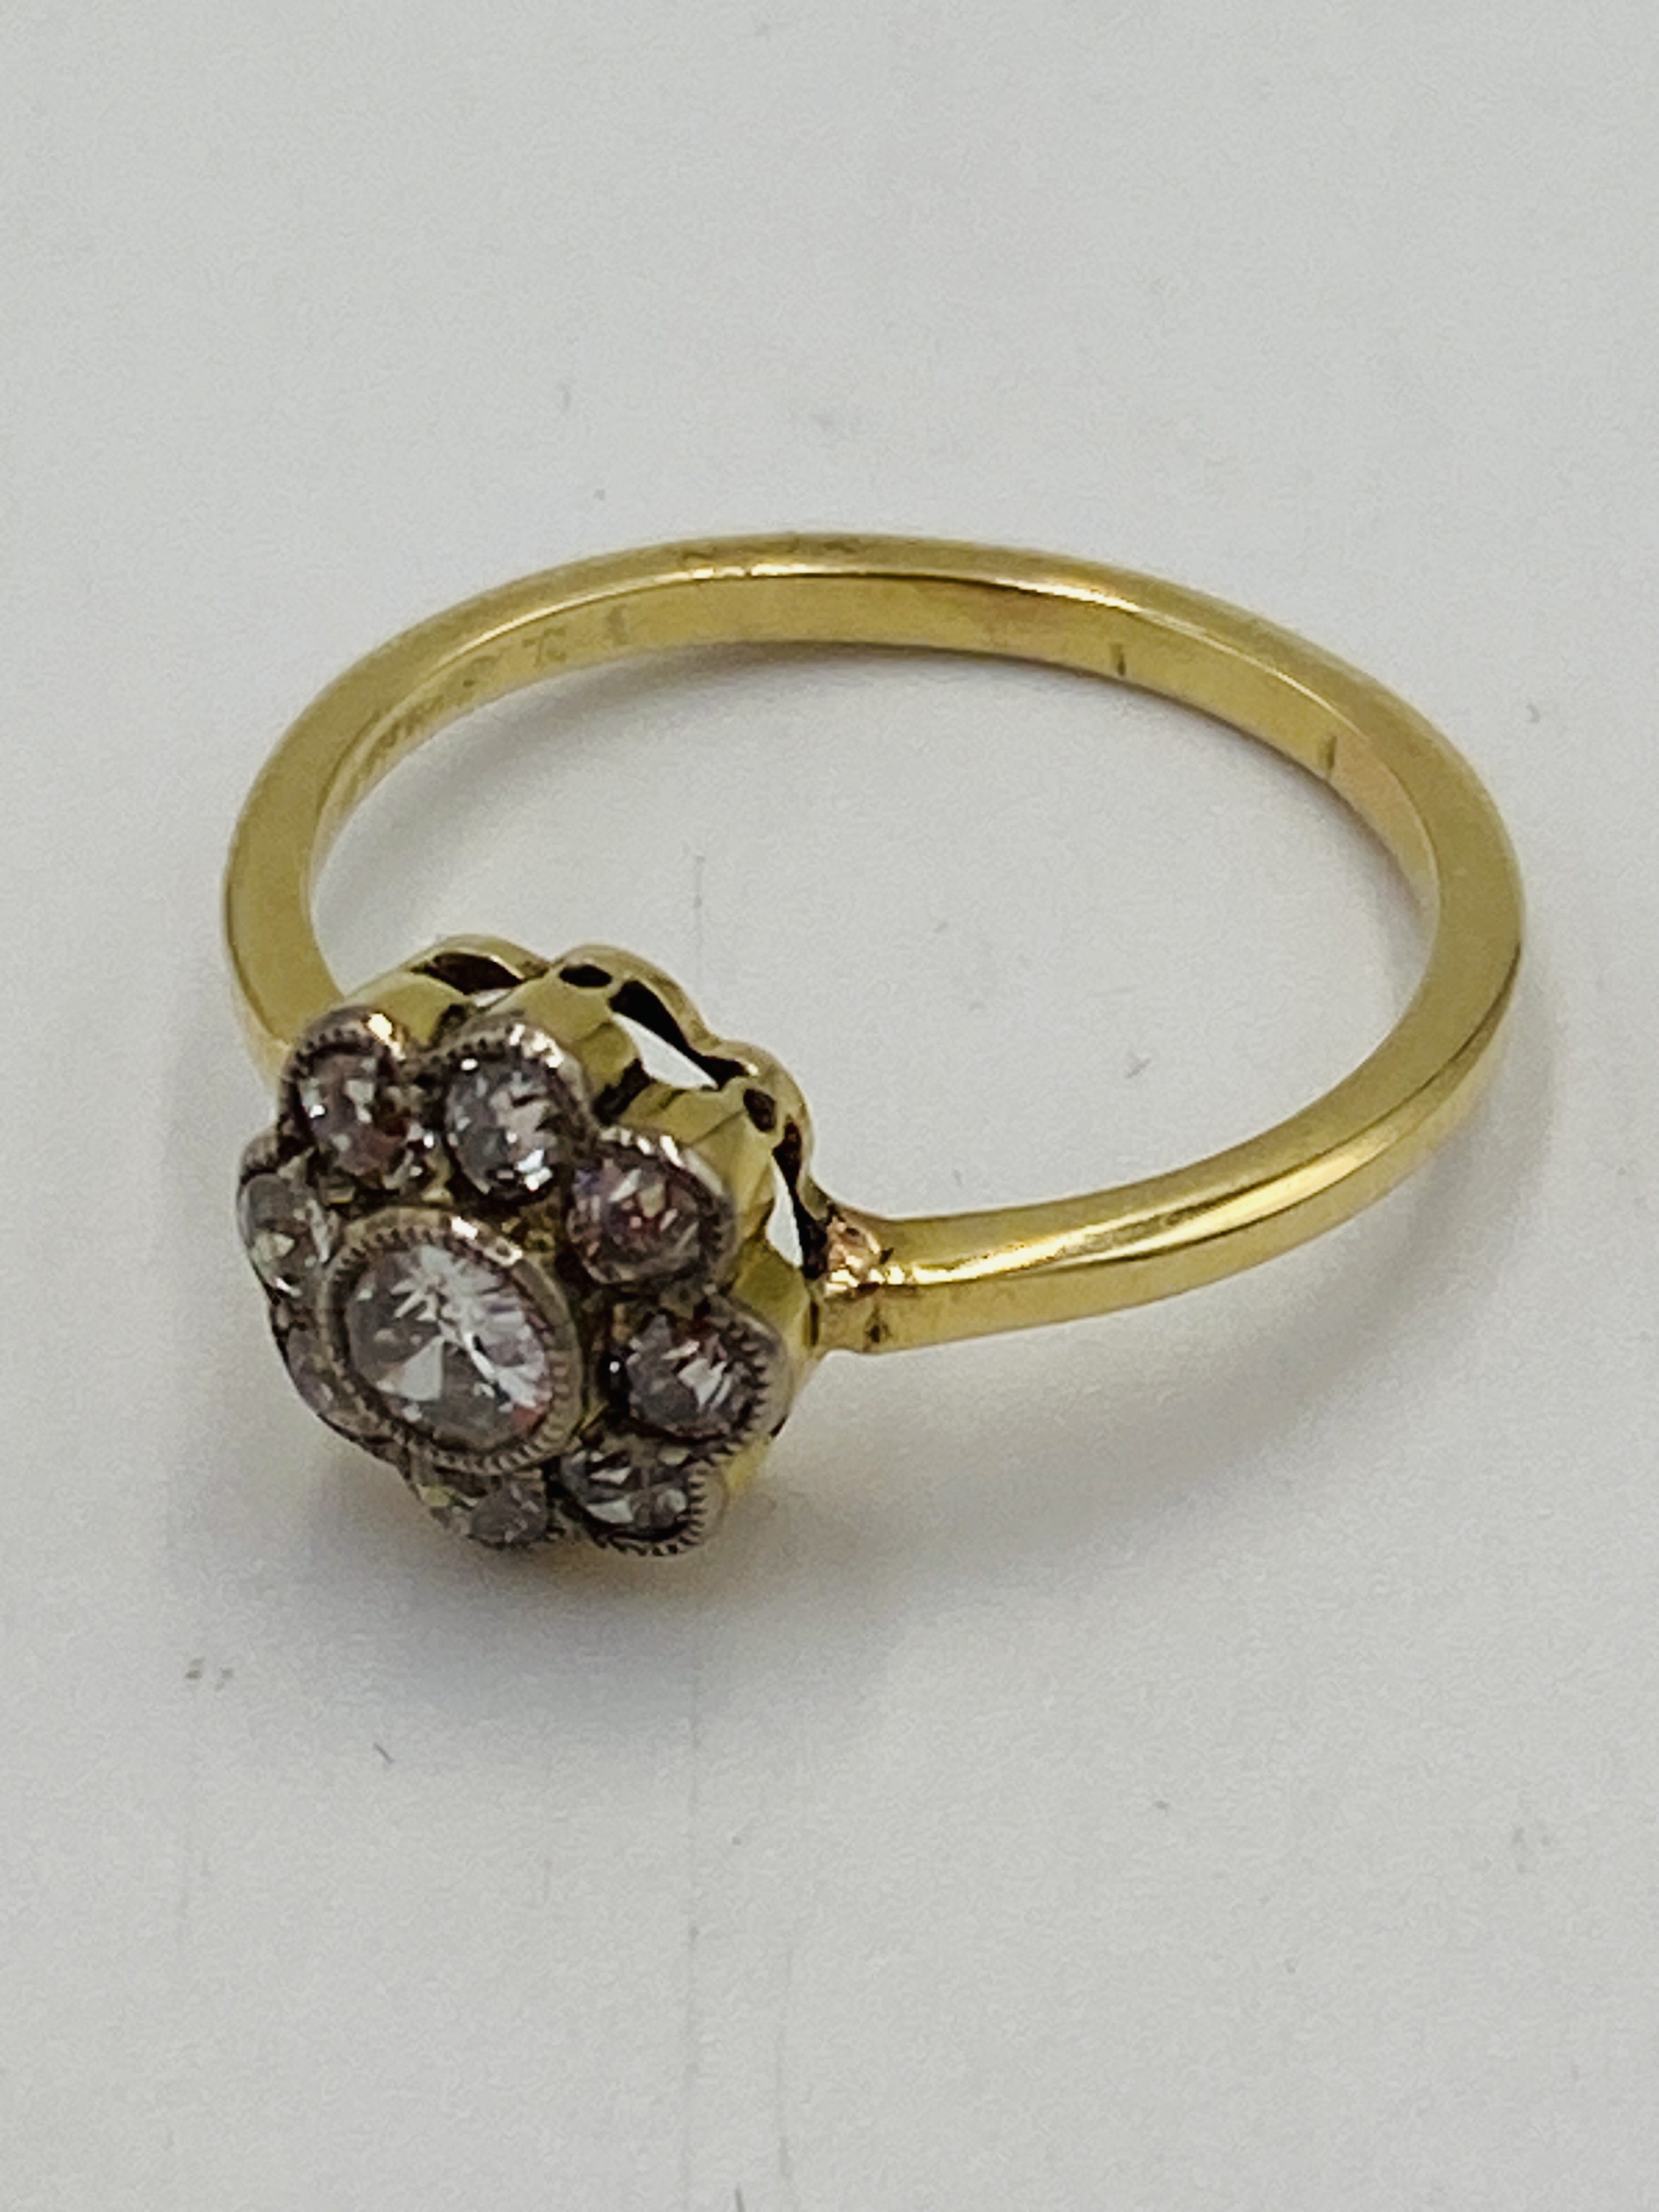 Gold and diamond 'daisy' ring - Image 5 of 6